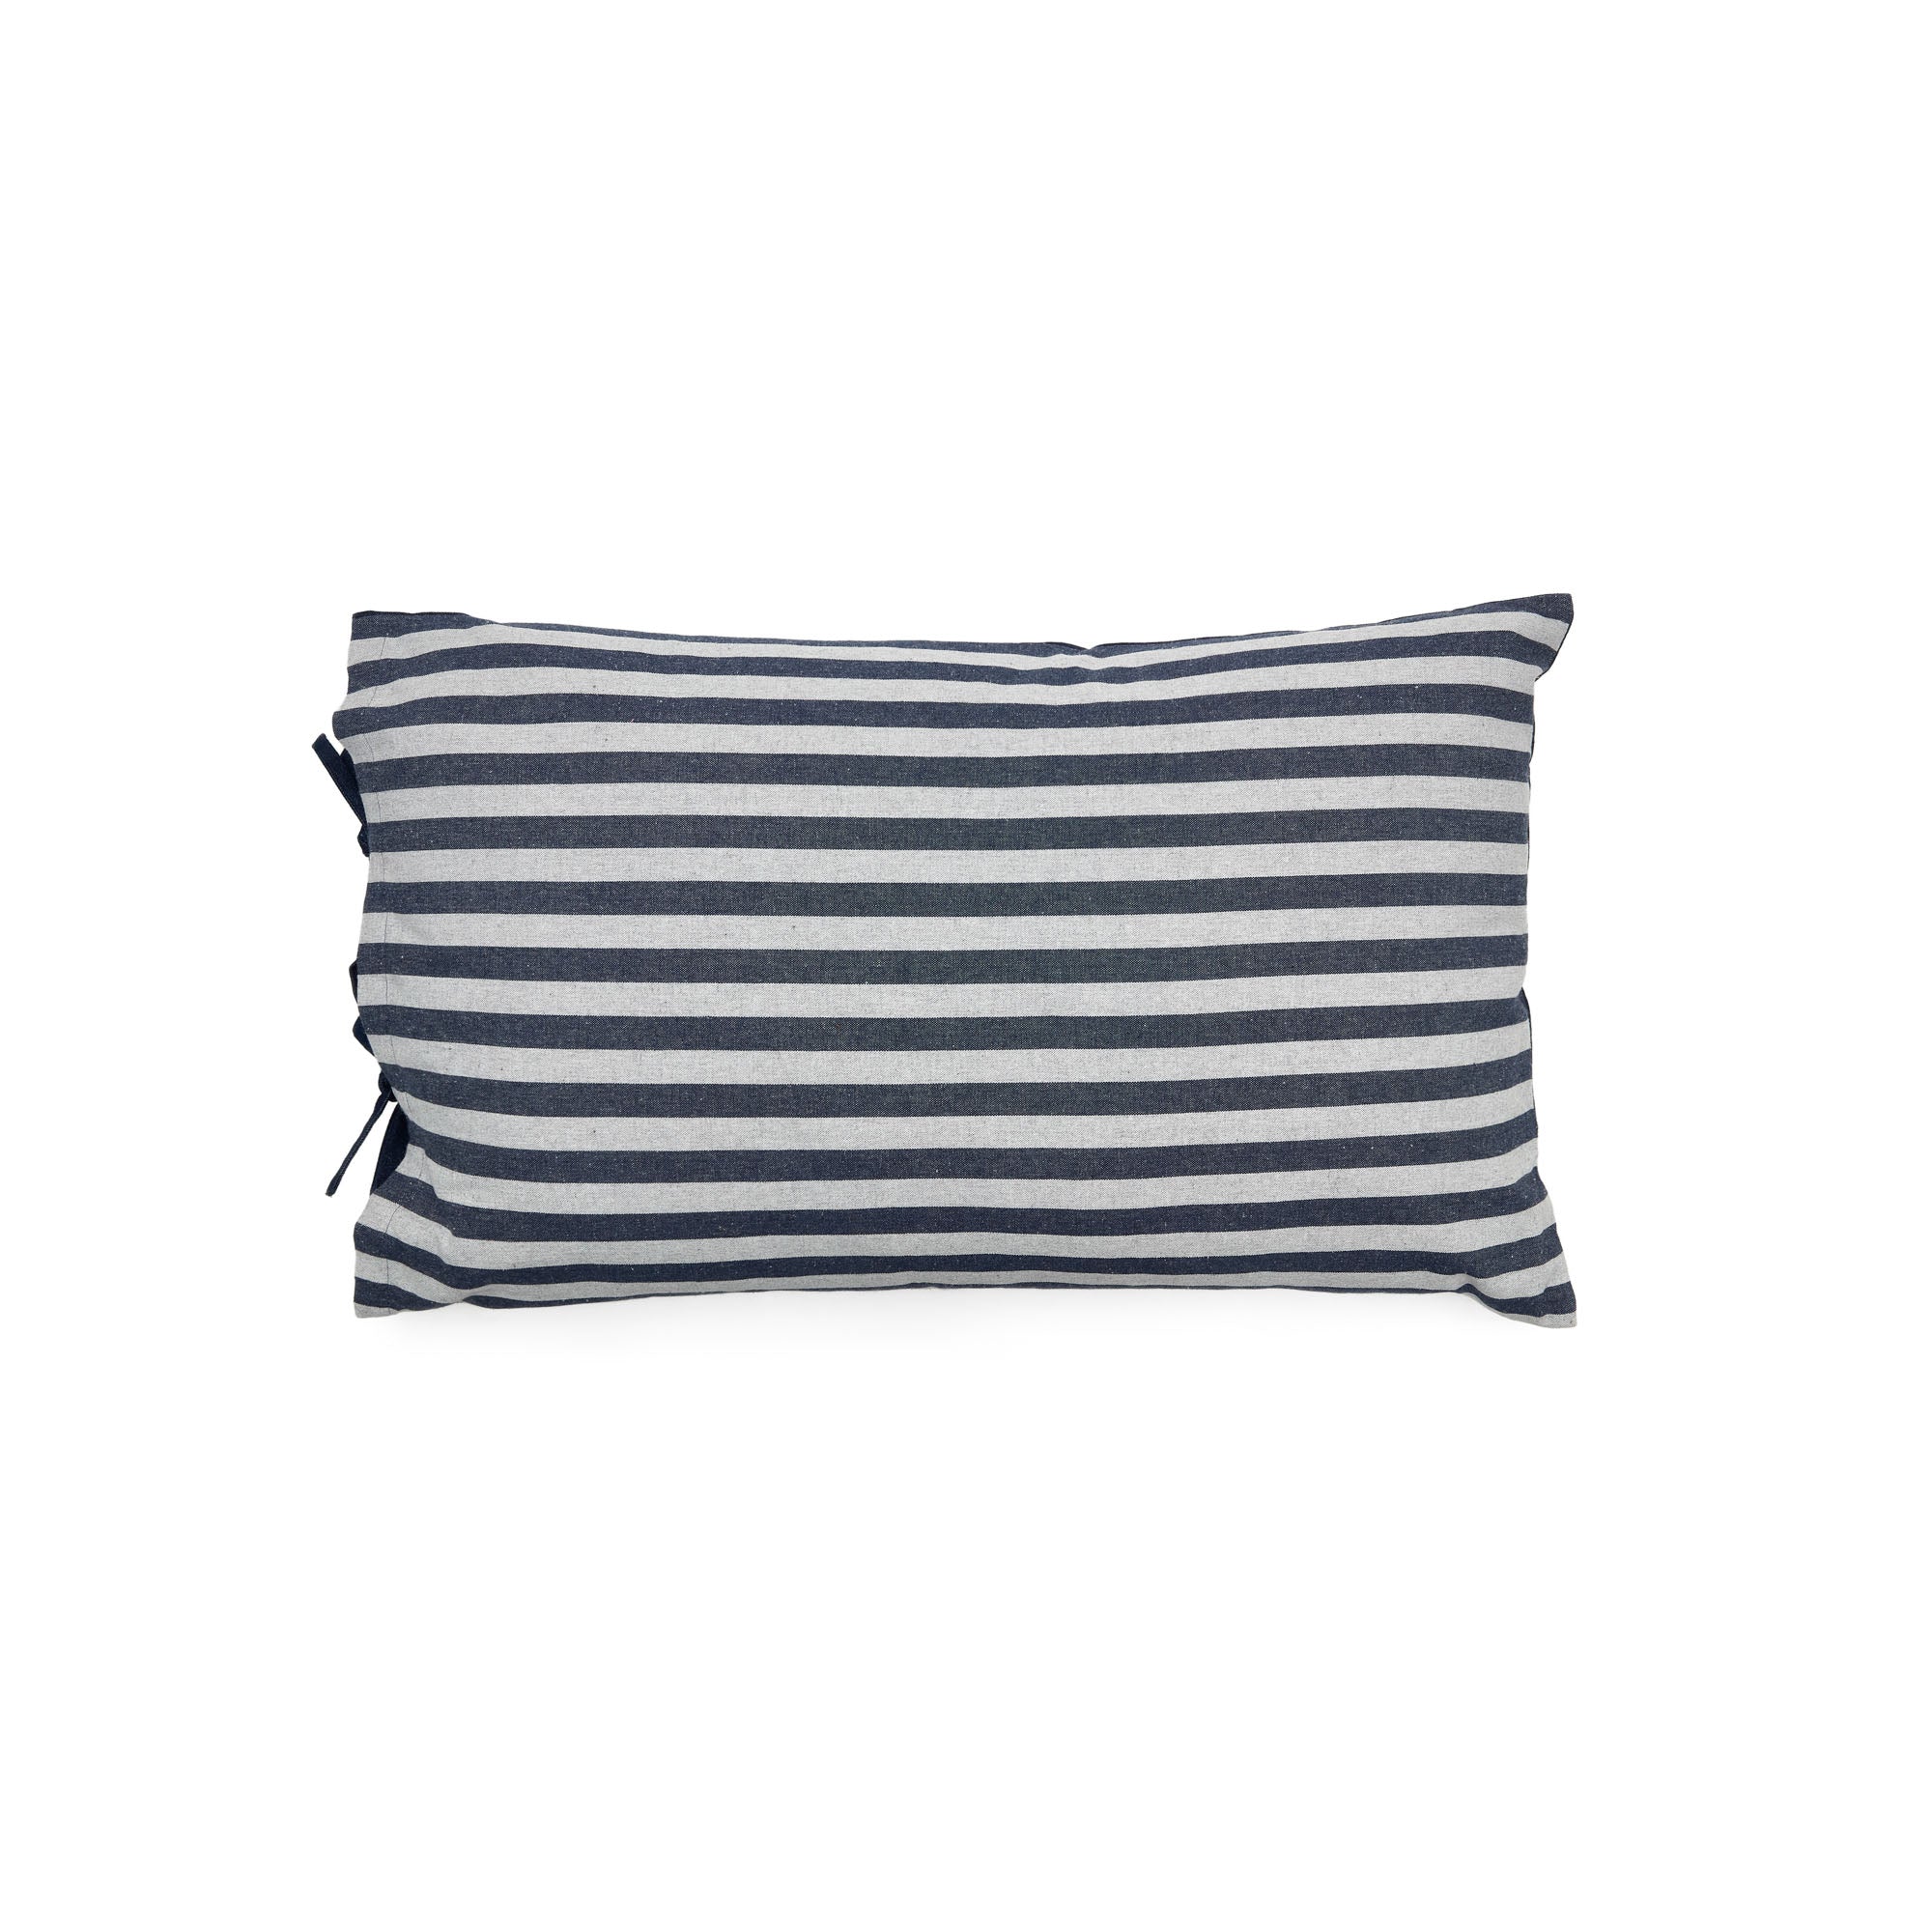 Tabby combined stripes 100% cotton cushion in mustard and white, 40 x 60 cm